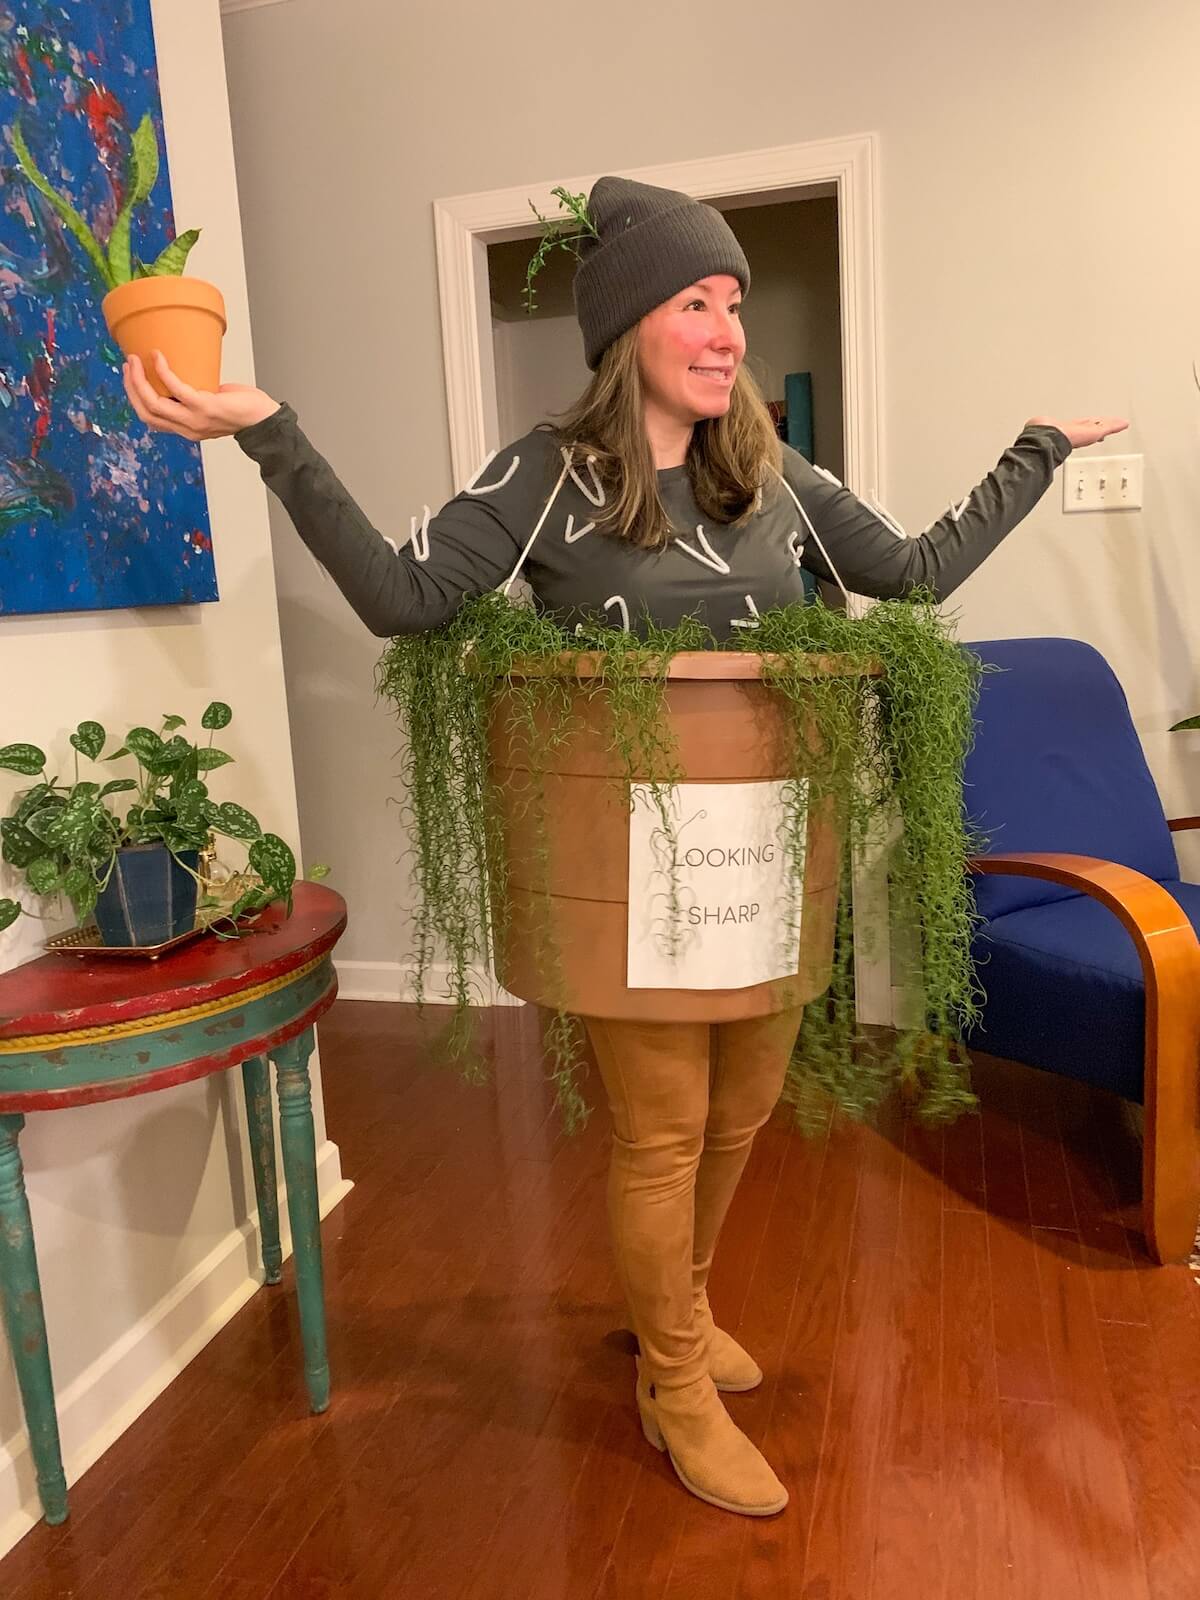 Woman dressed up as a potted cactus for halloween.